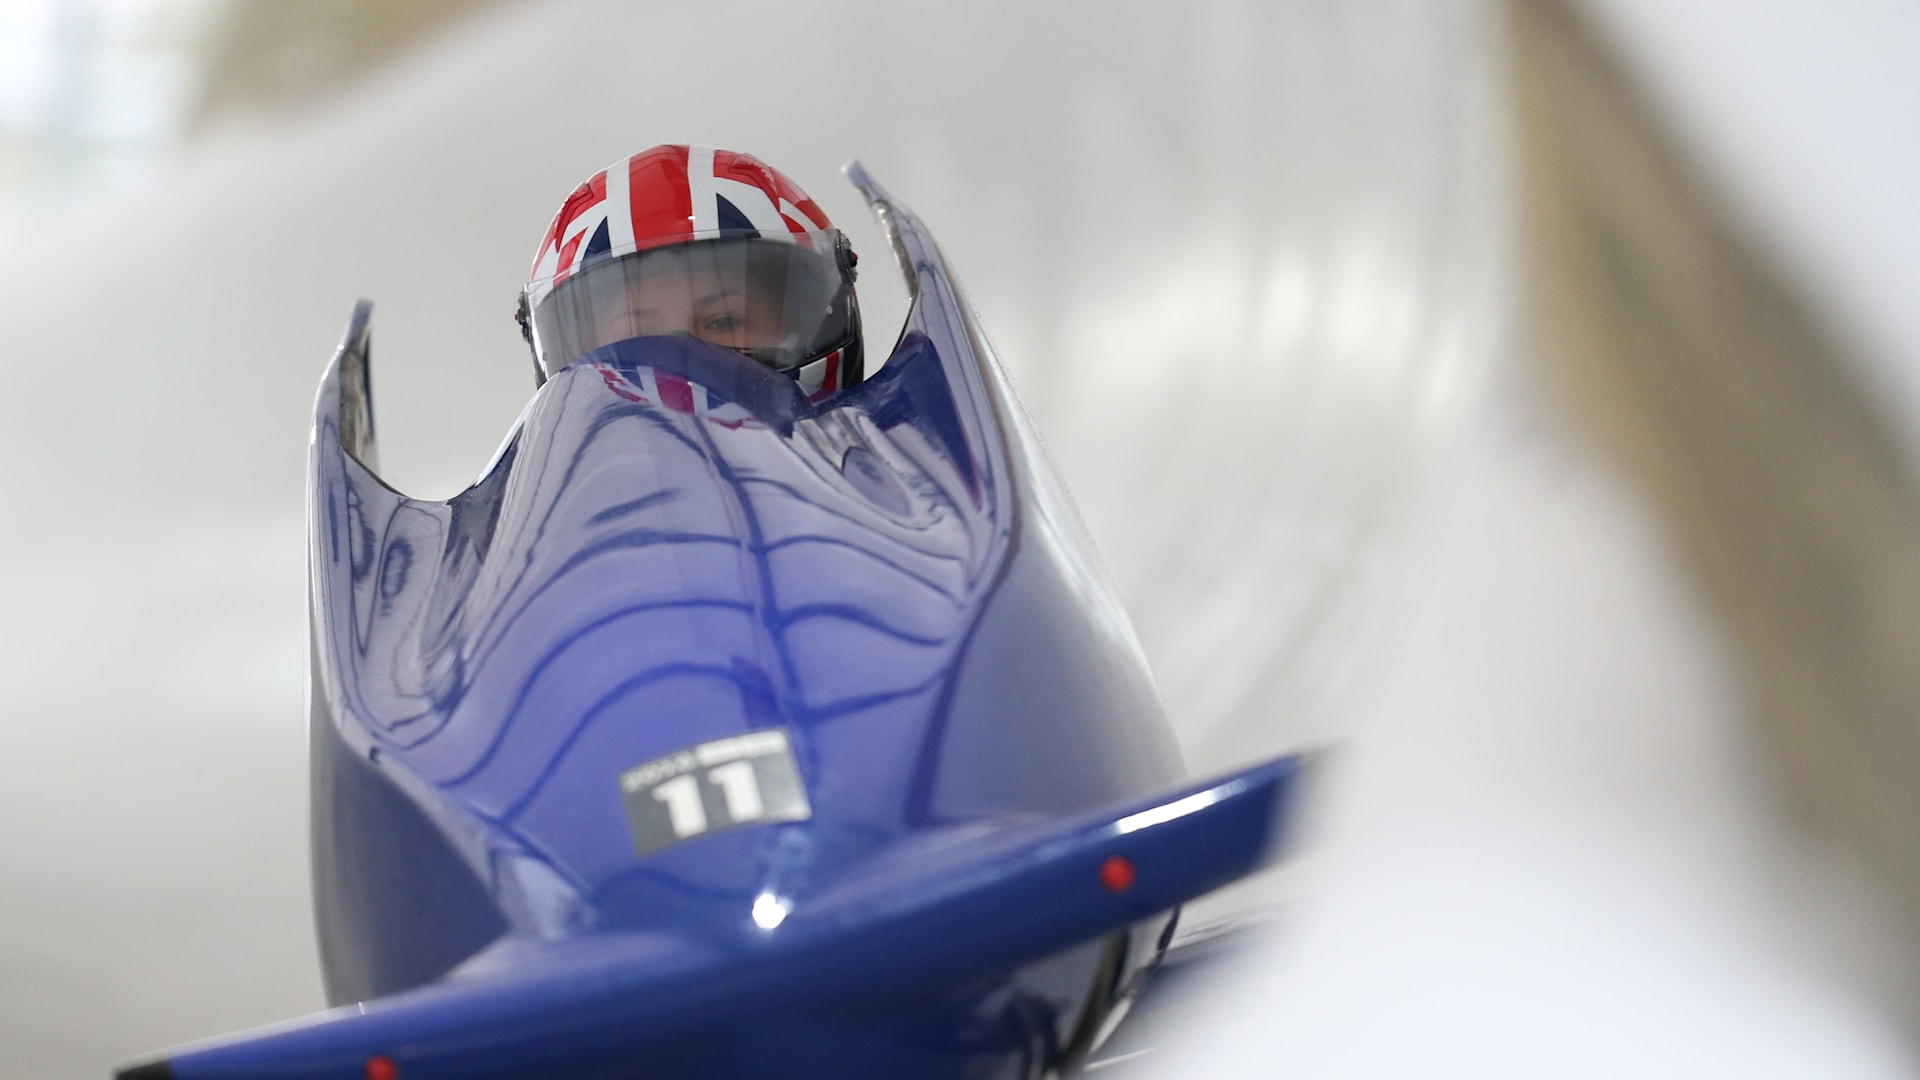 Monobob Watch the only bobsleigh event at the Youth Olympic Games